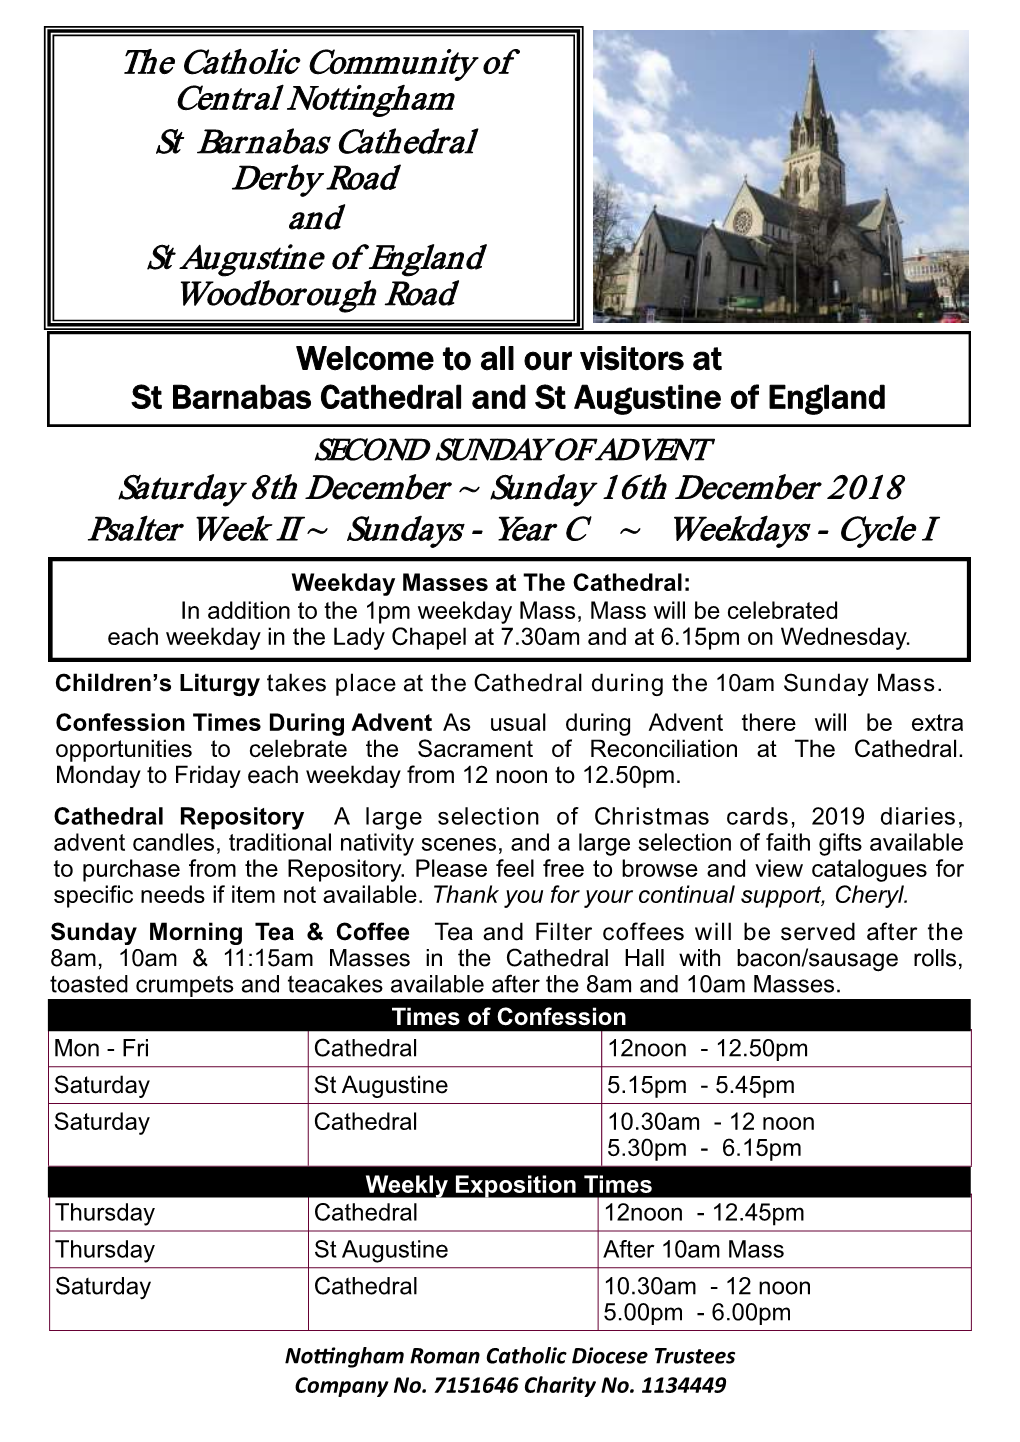 The Catholic Community of Central Nottingham St Barnabas Cathedral